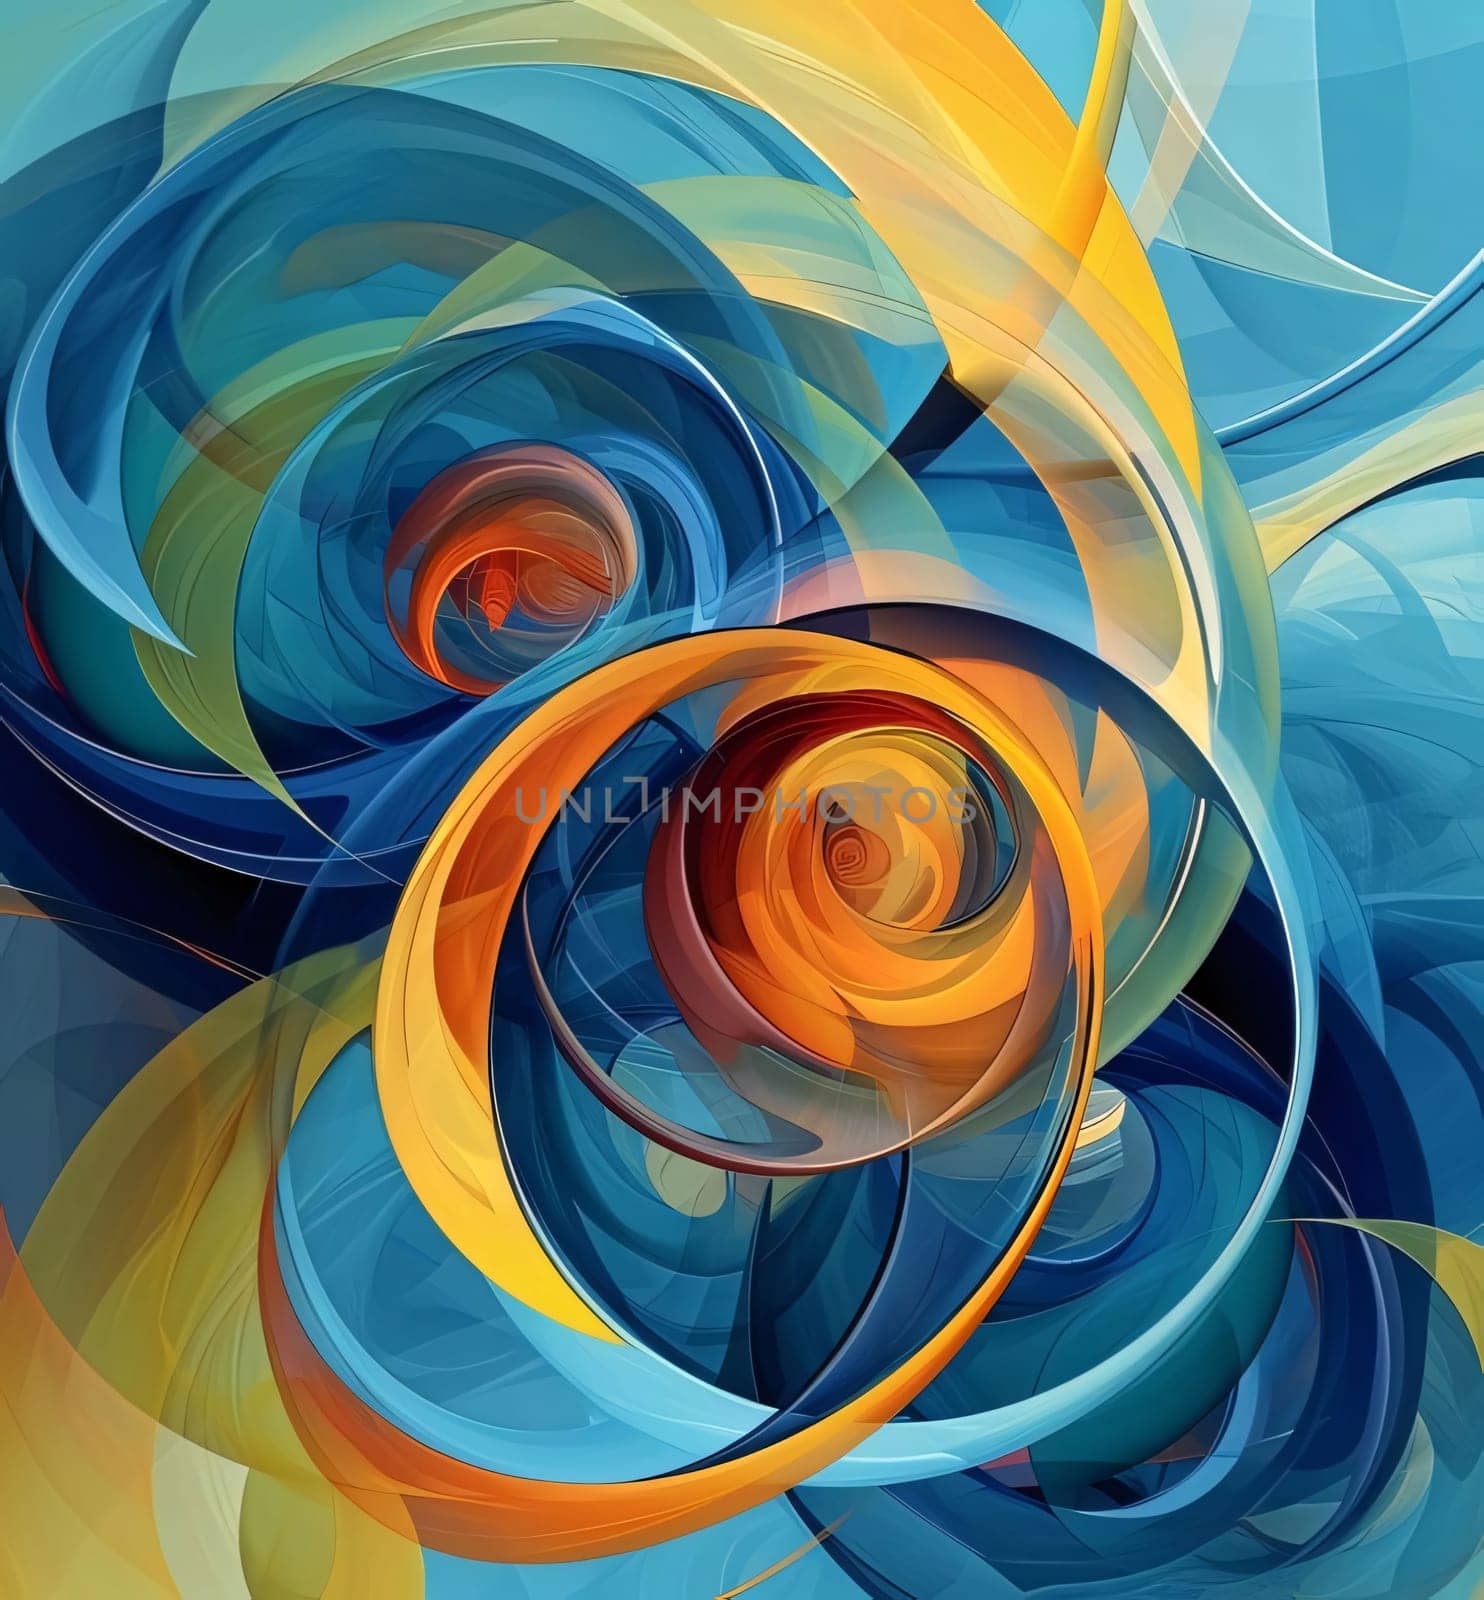 Abstract background design: abstract background with blue, orange, yellow and orange swirls